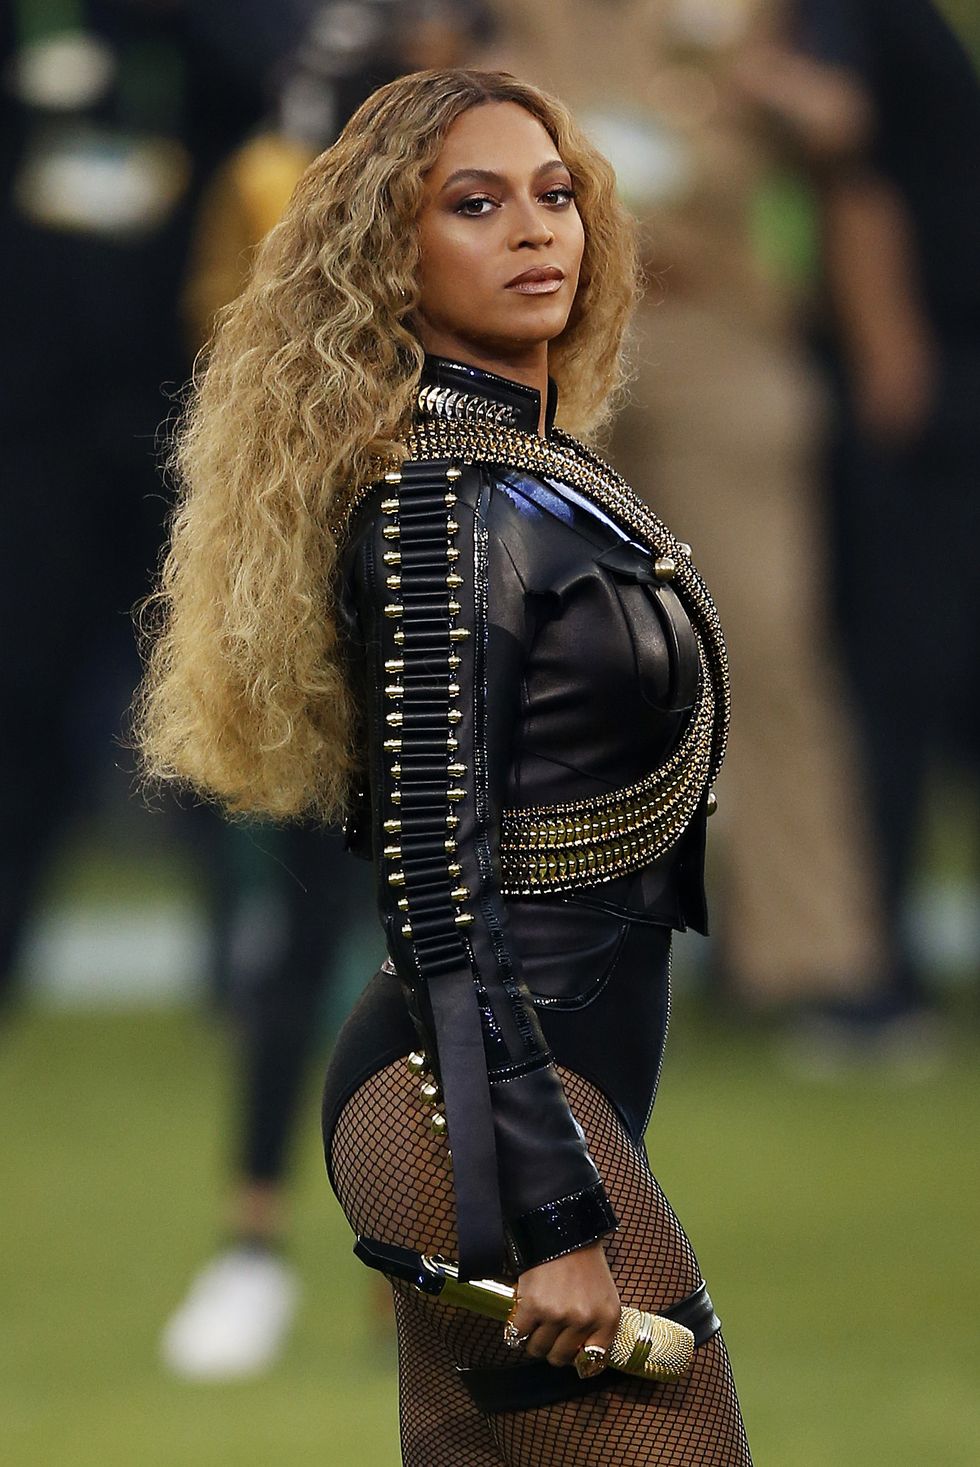 Beyonce performs onstage during the Pepsi Super Bowl 50 Halftime Show